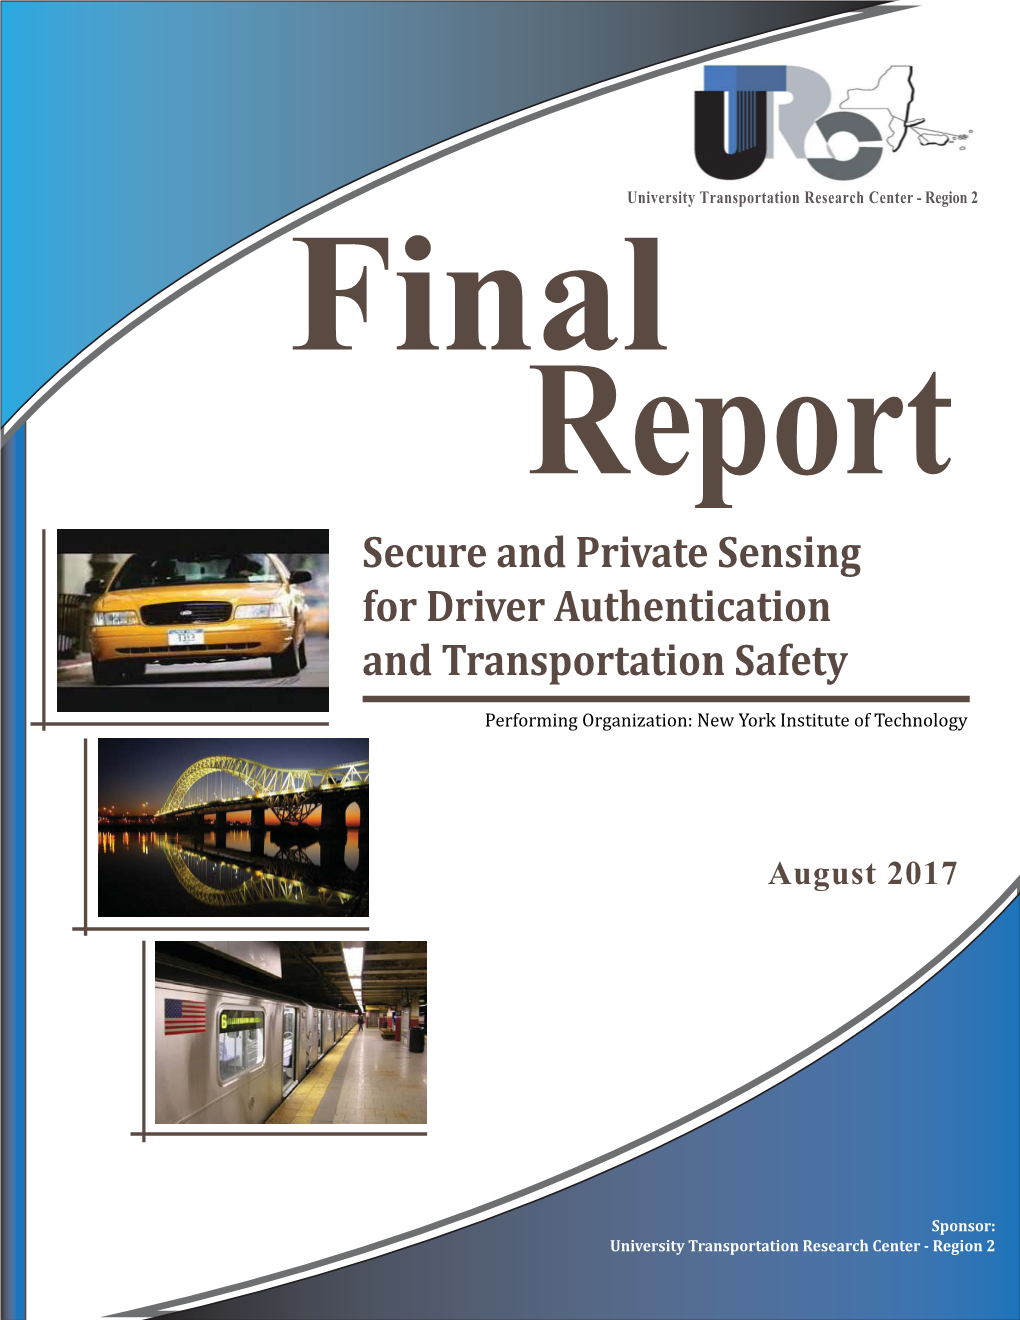 Secure and Private Sensing for Driver Authentication and Transportation Safety